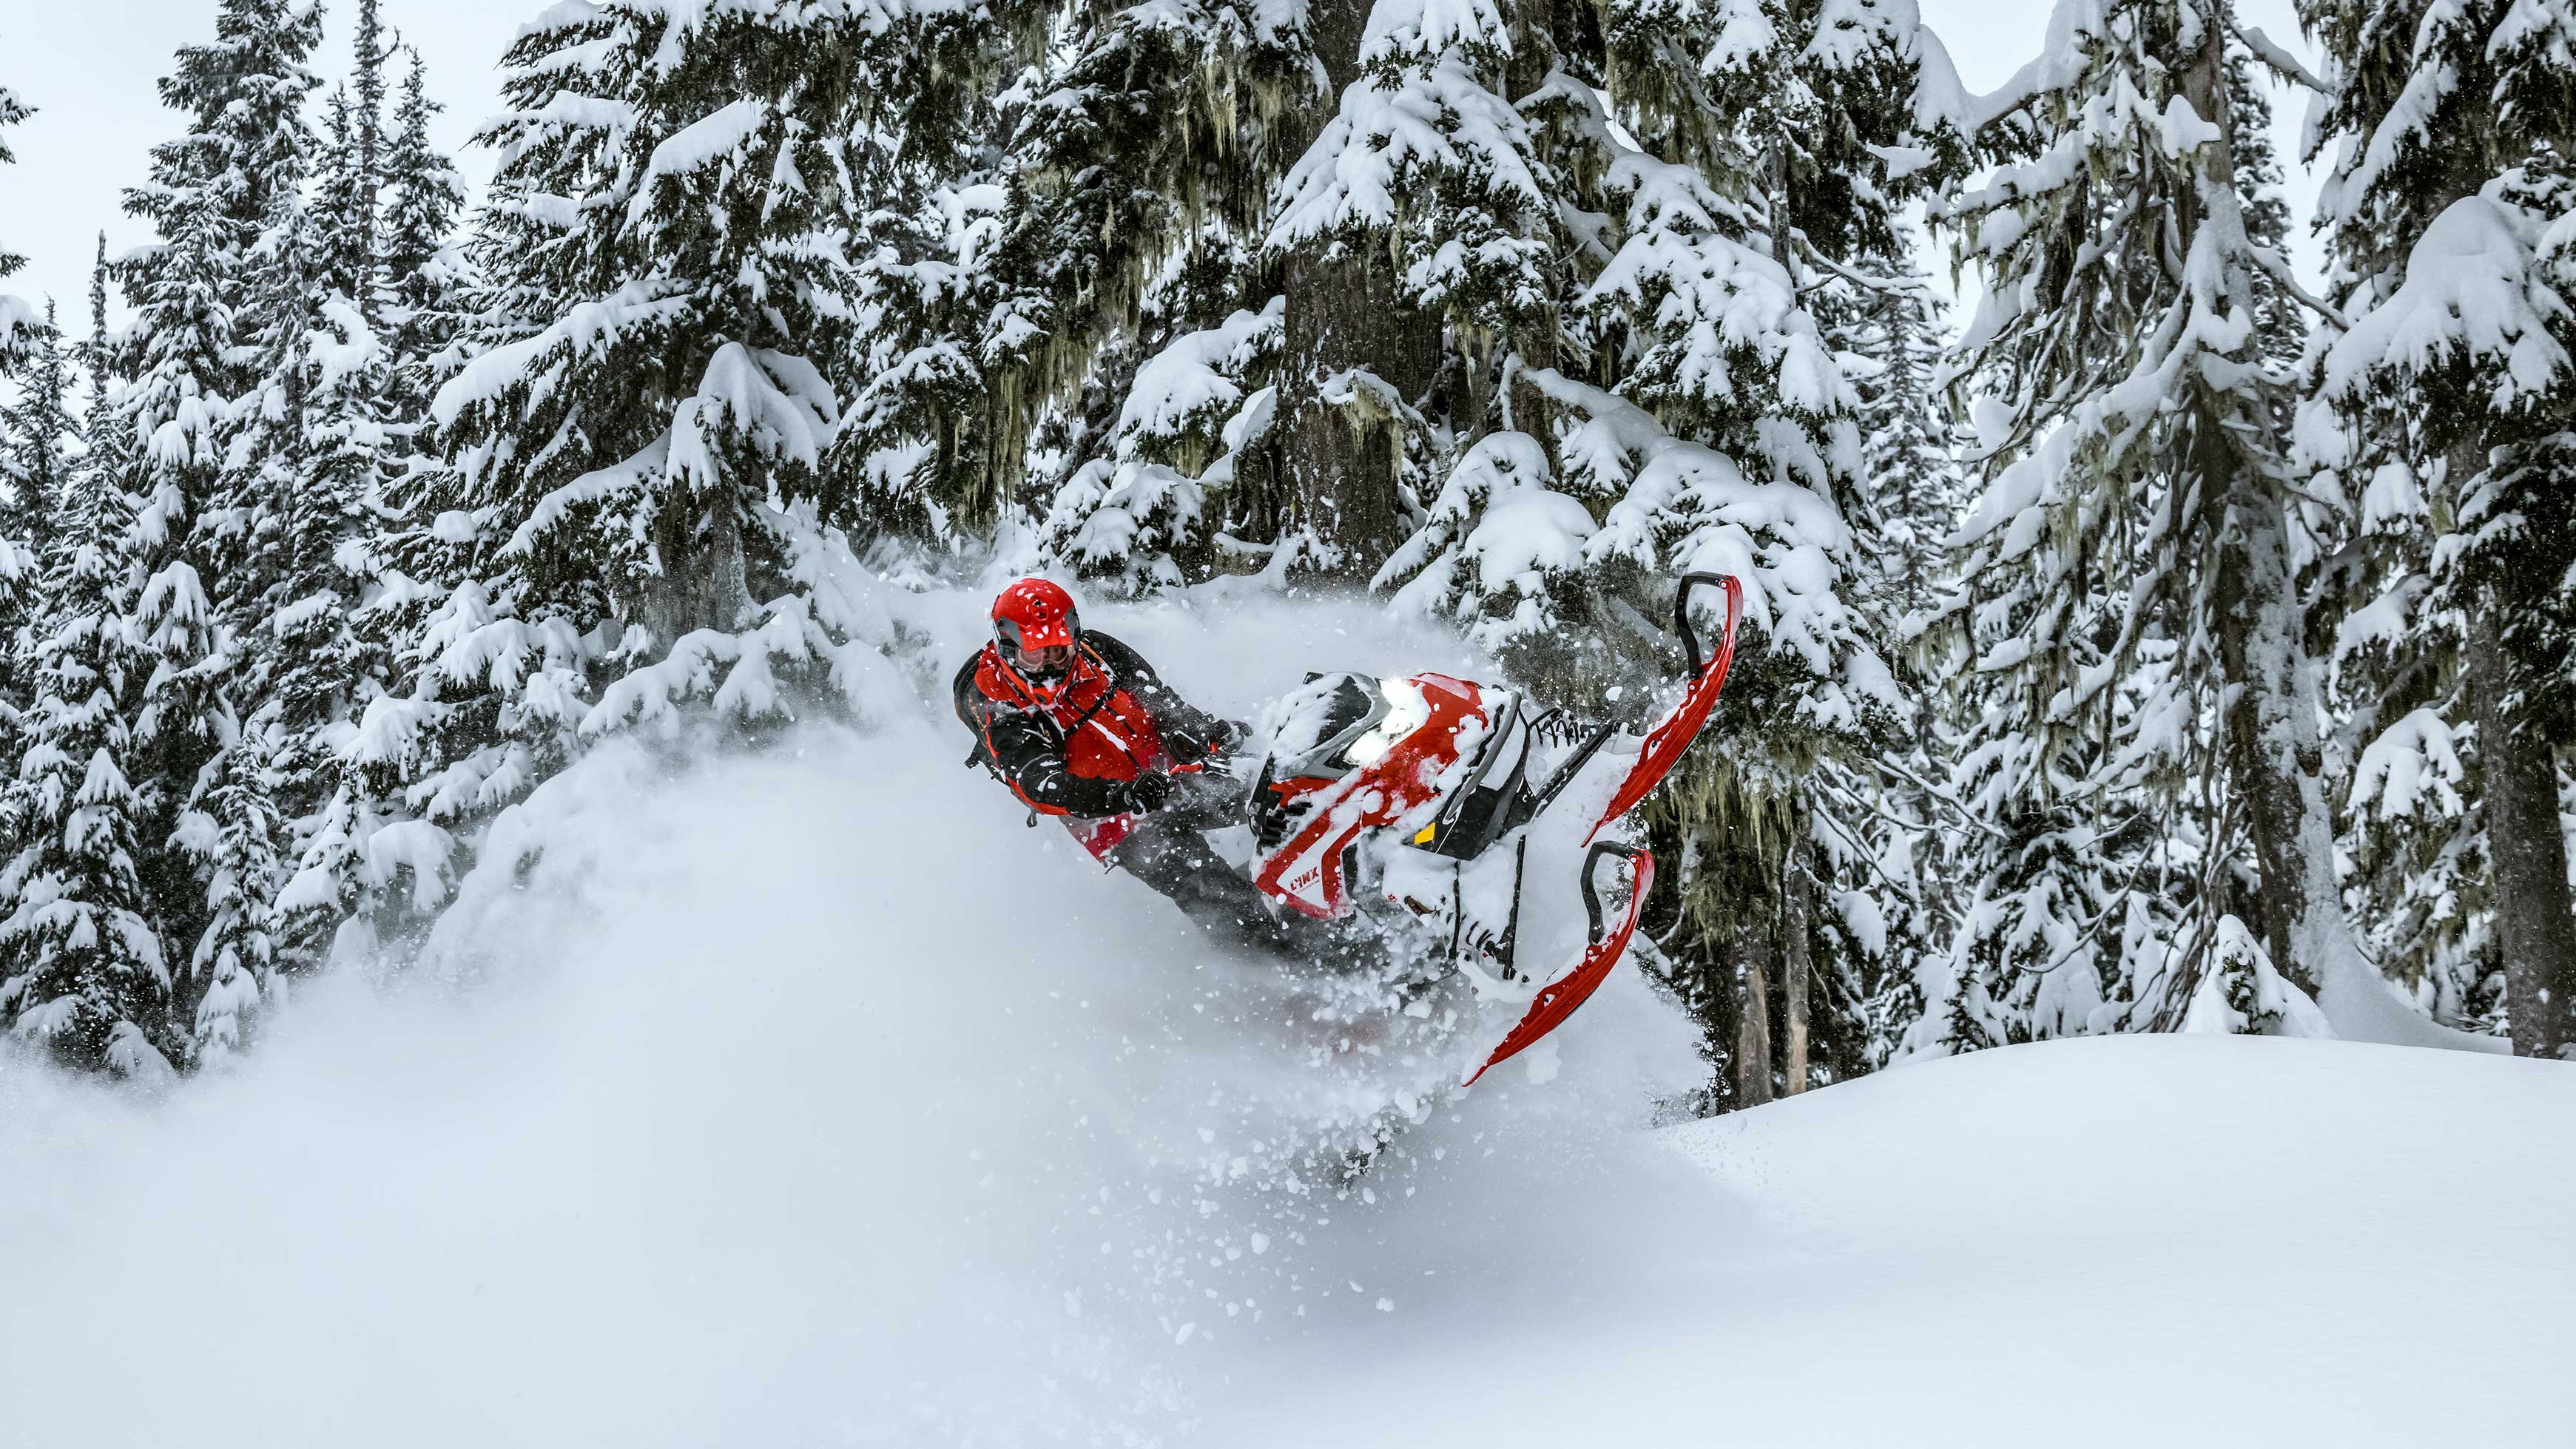 Man well equiped on a red Shredder in a snowy forest